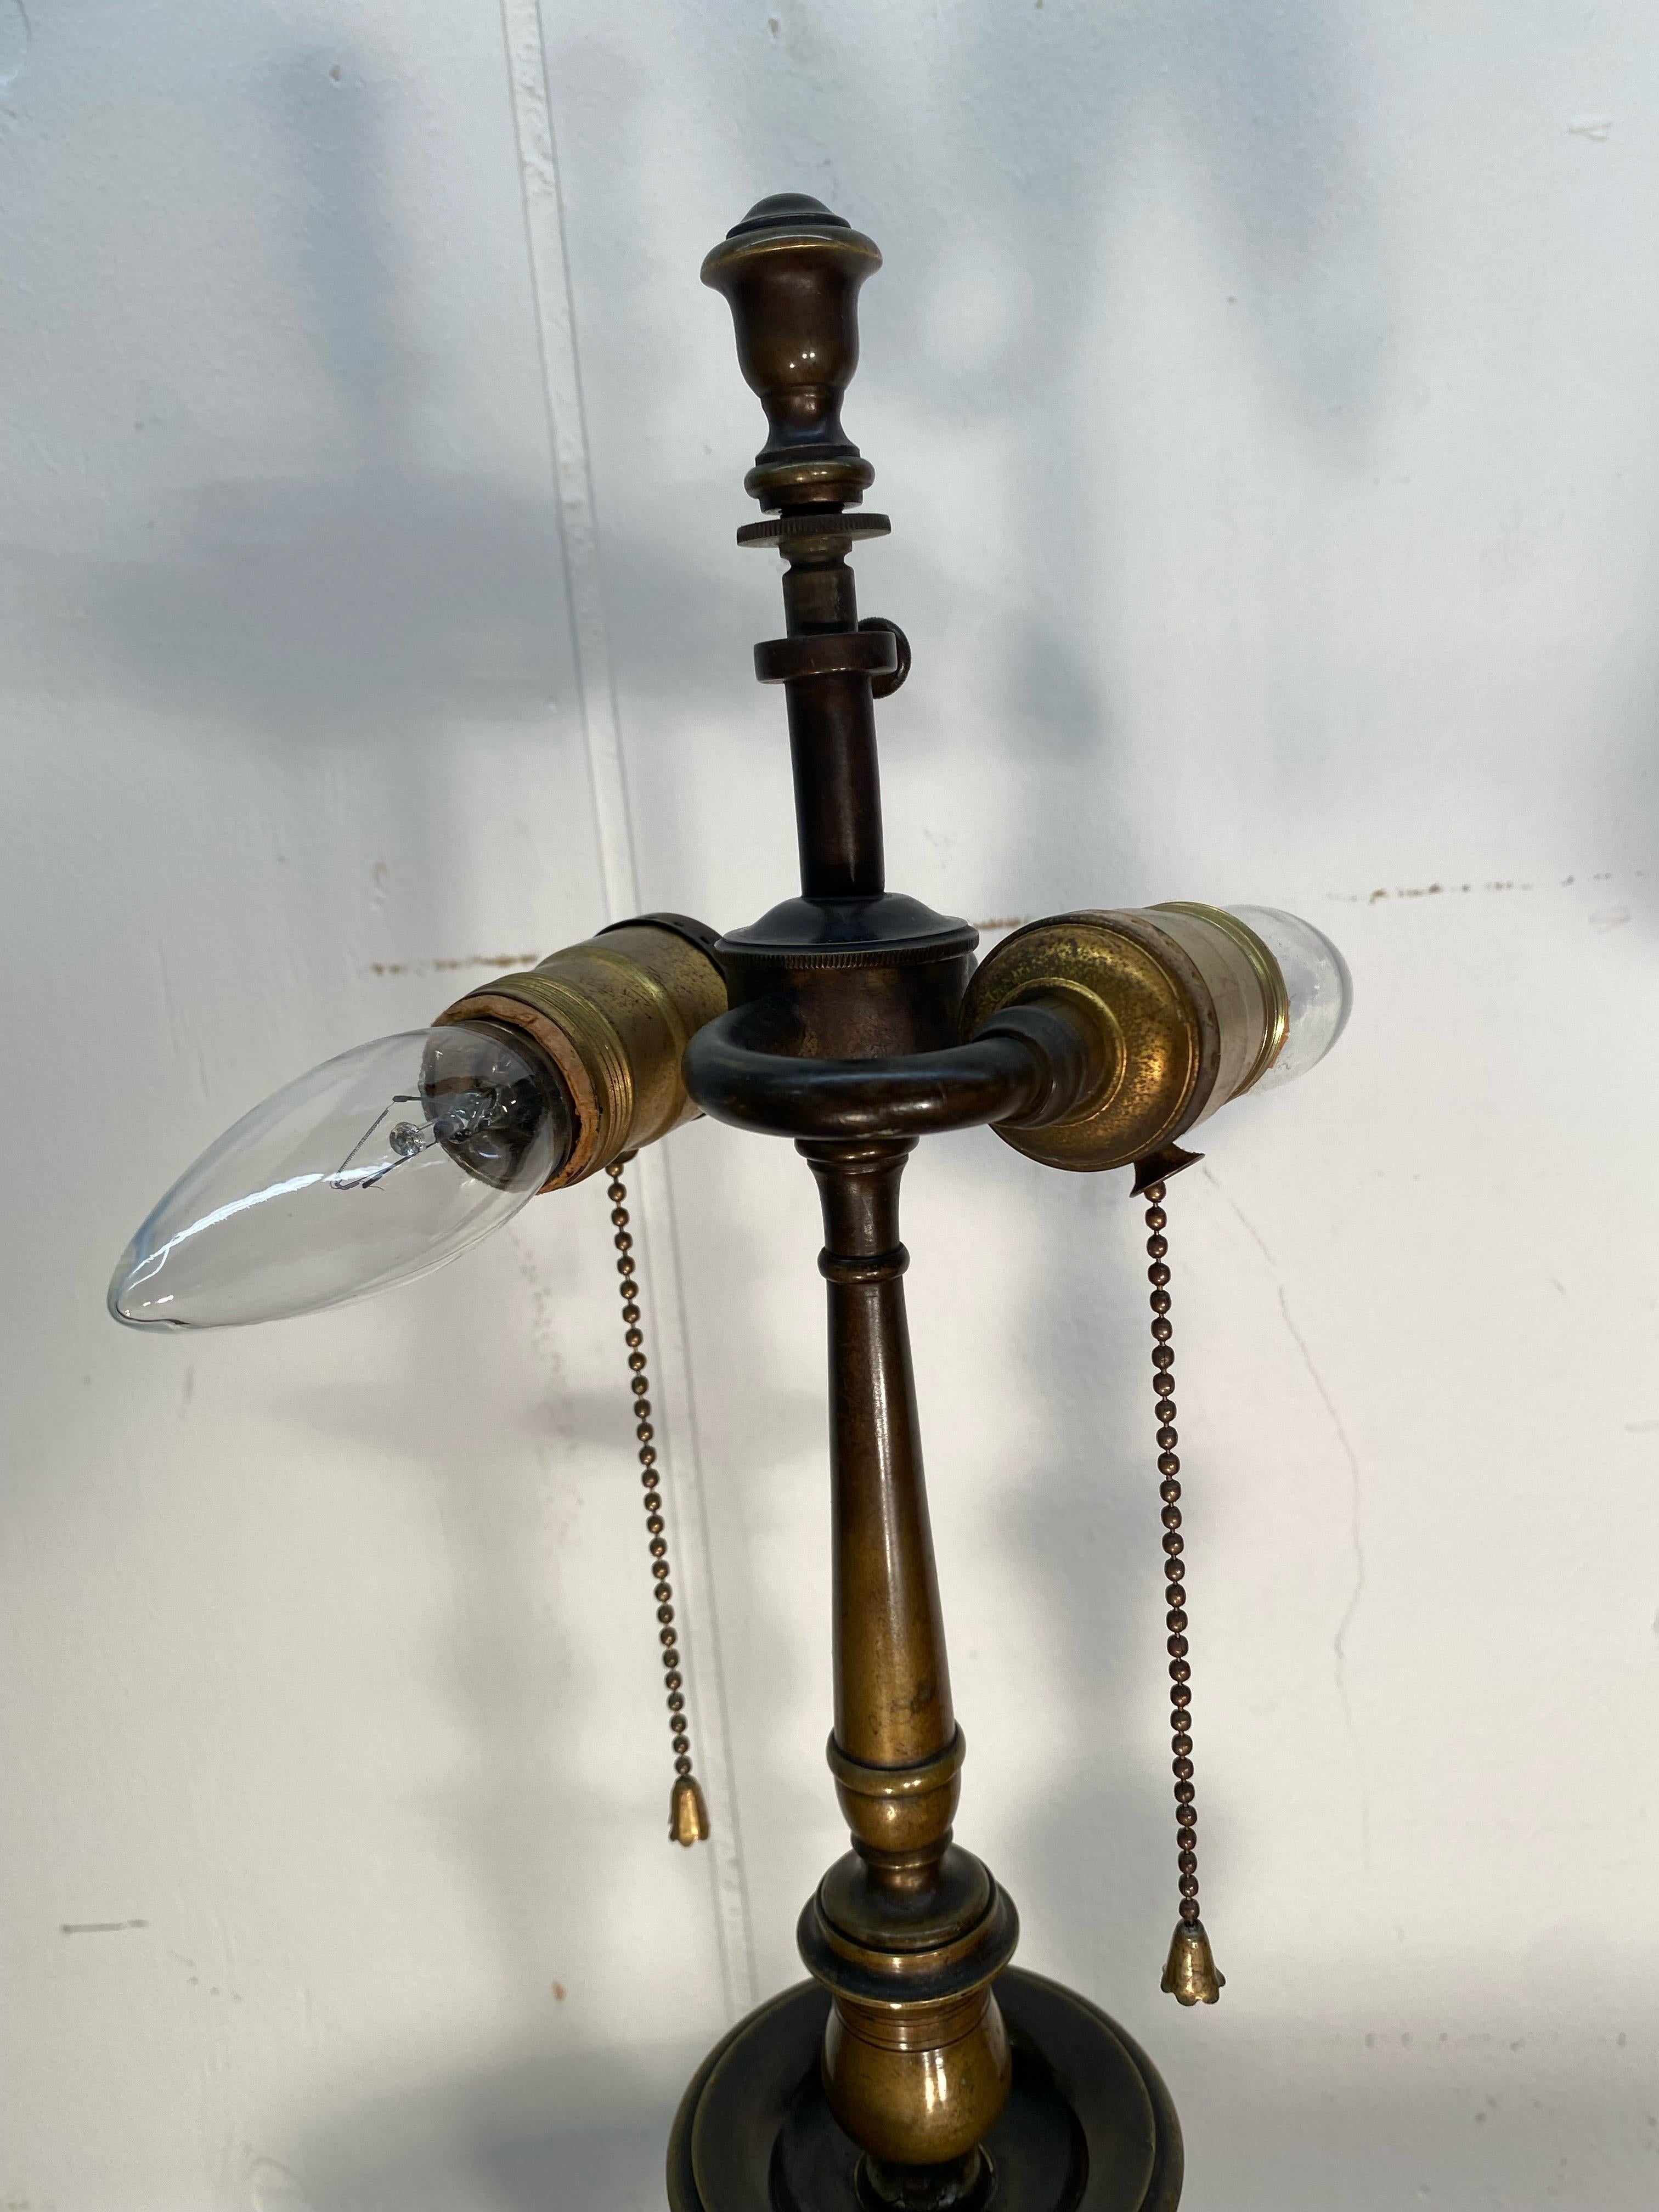 Pair of English Bronze Balustrade Lamps with Tole Shades, Early 20th Century For Sale 1